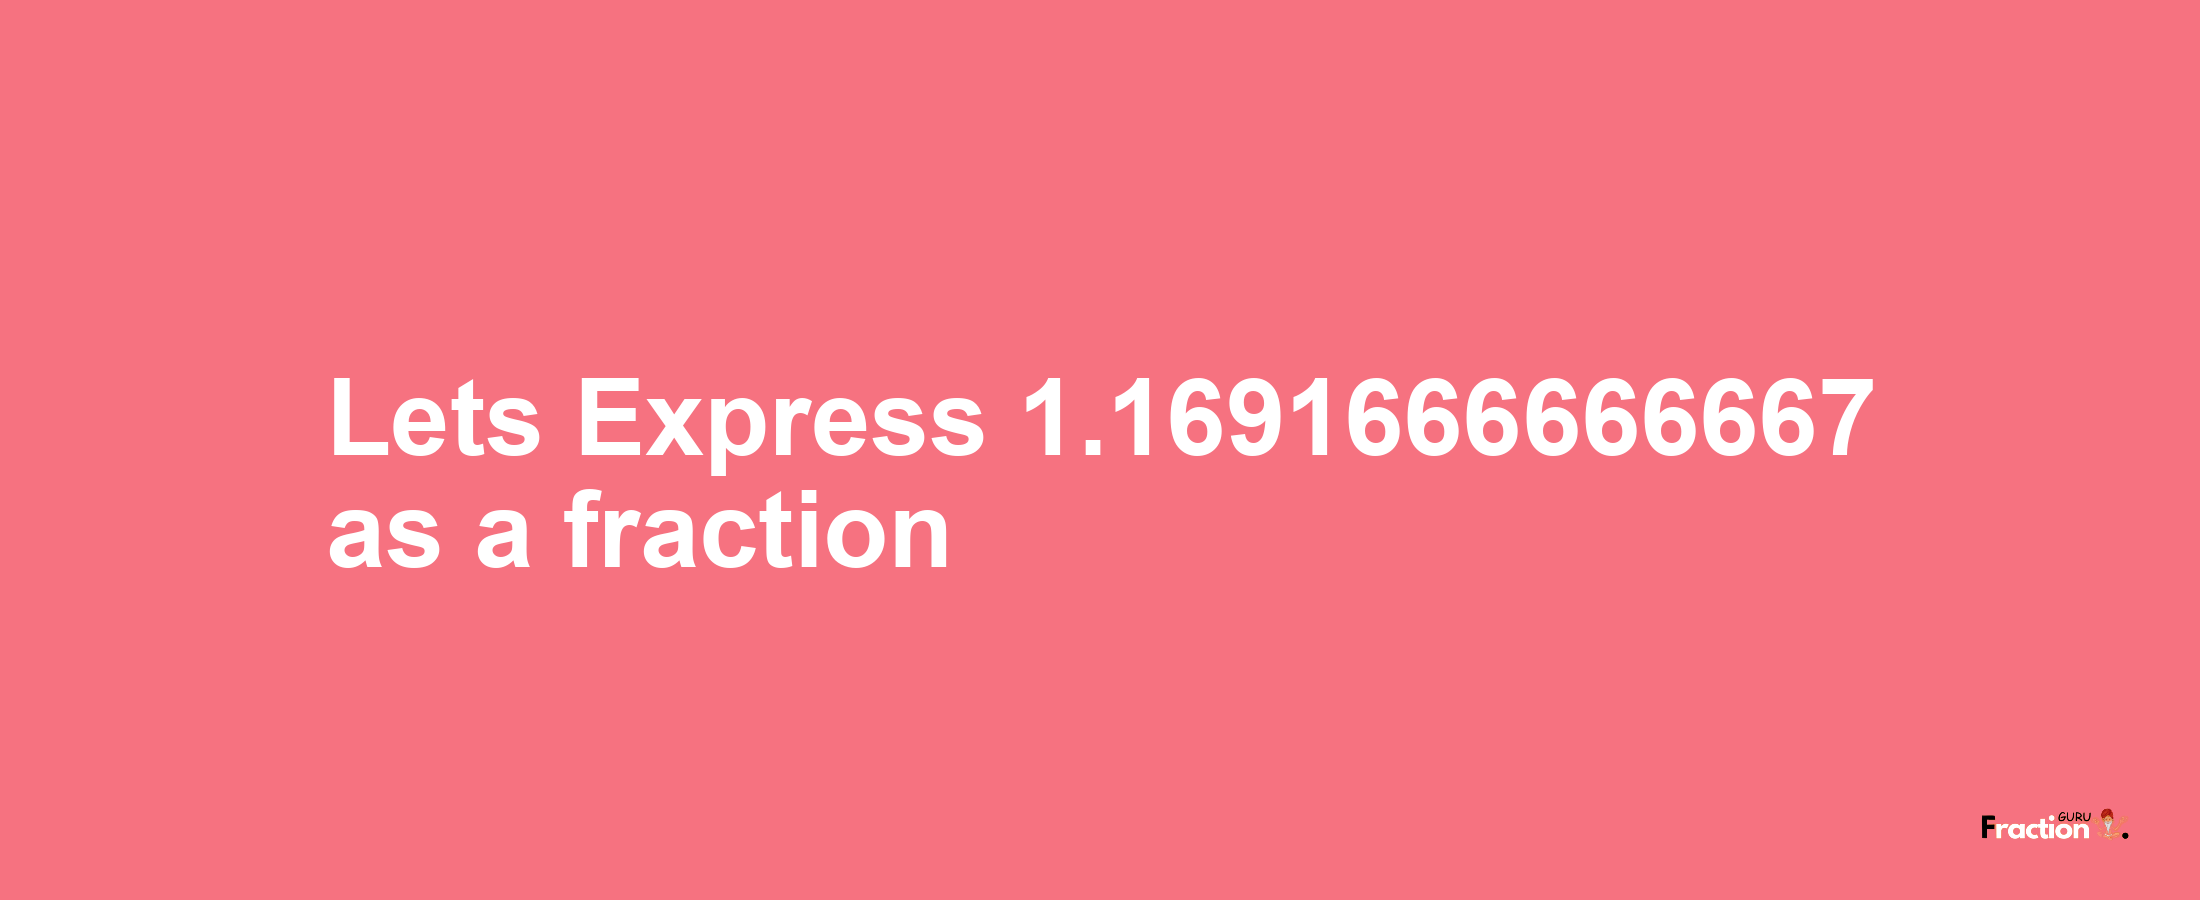 Lets Express 1.1691666666667 as afraction